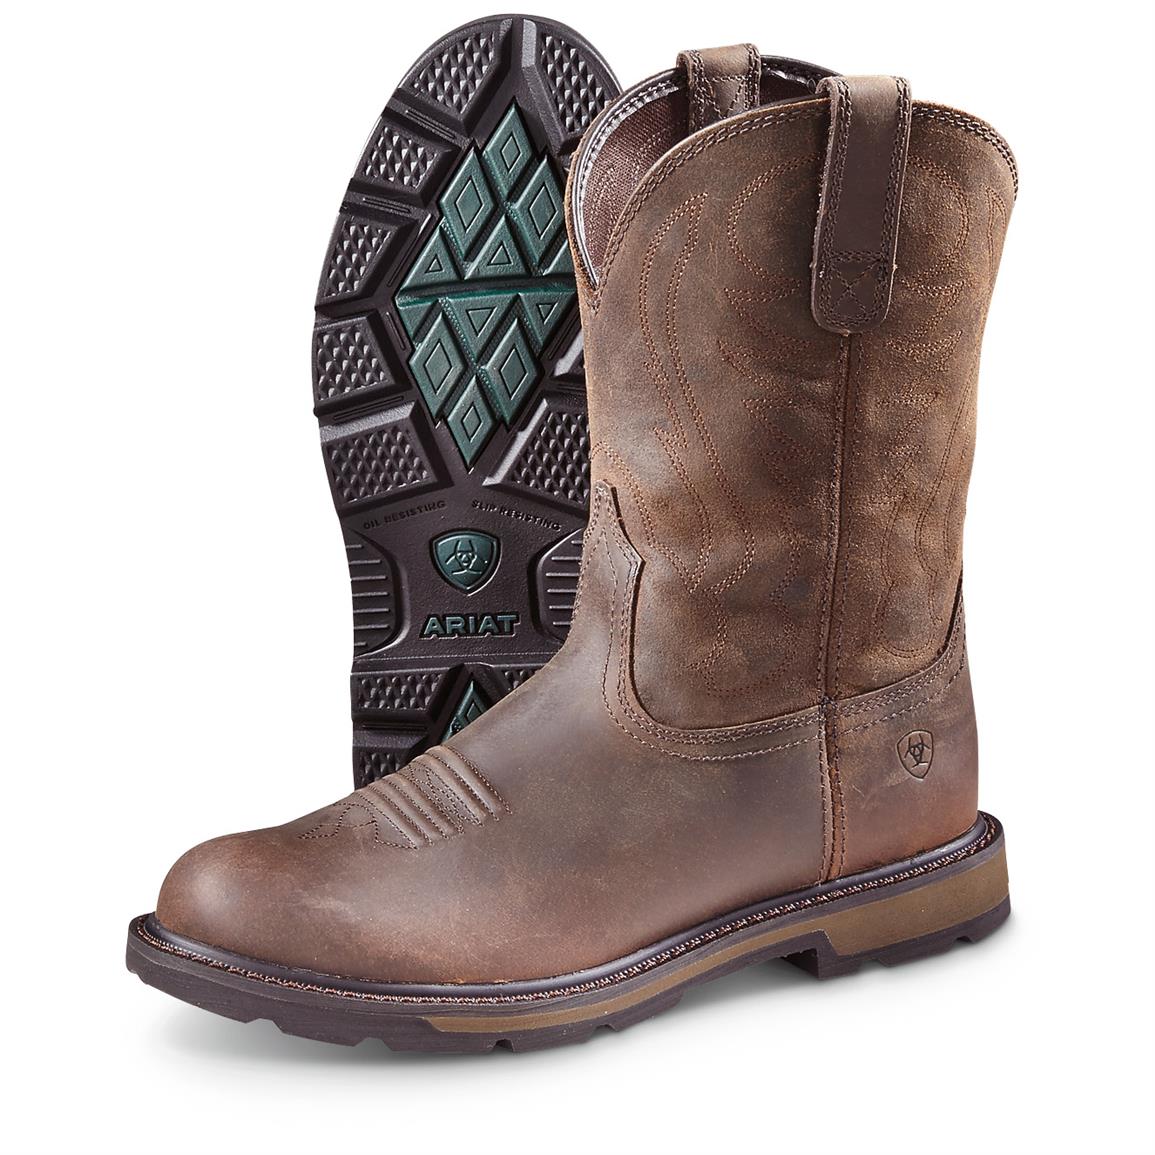 ariat boots ariat menu0027s groundbreaker pull-on boots, brown AYUOEQN